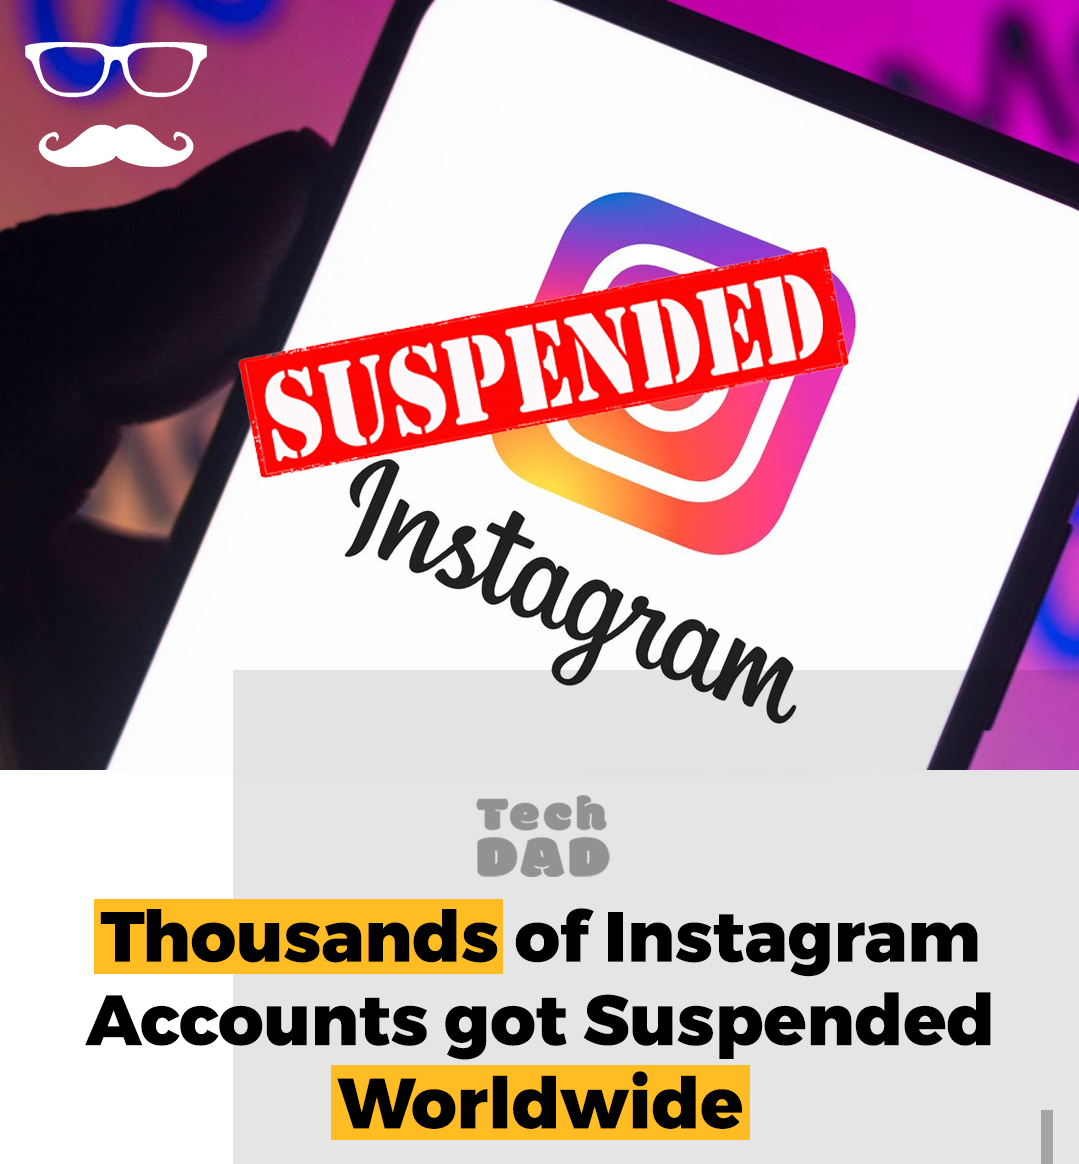 Instagram is having issues this afternoon, with reports of users having their accounts suspended.